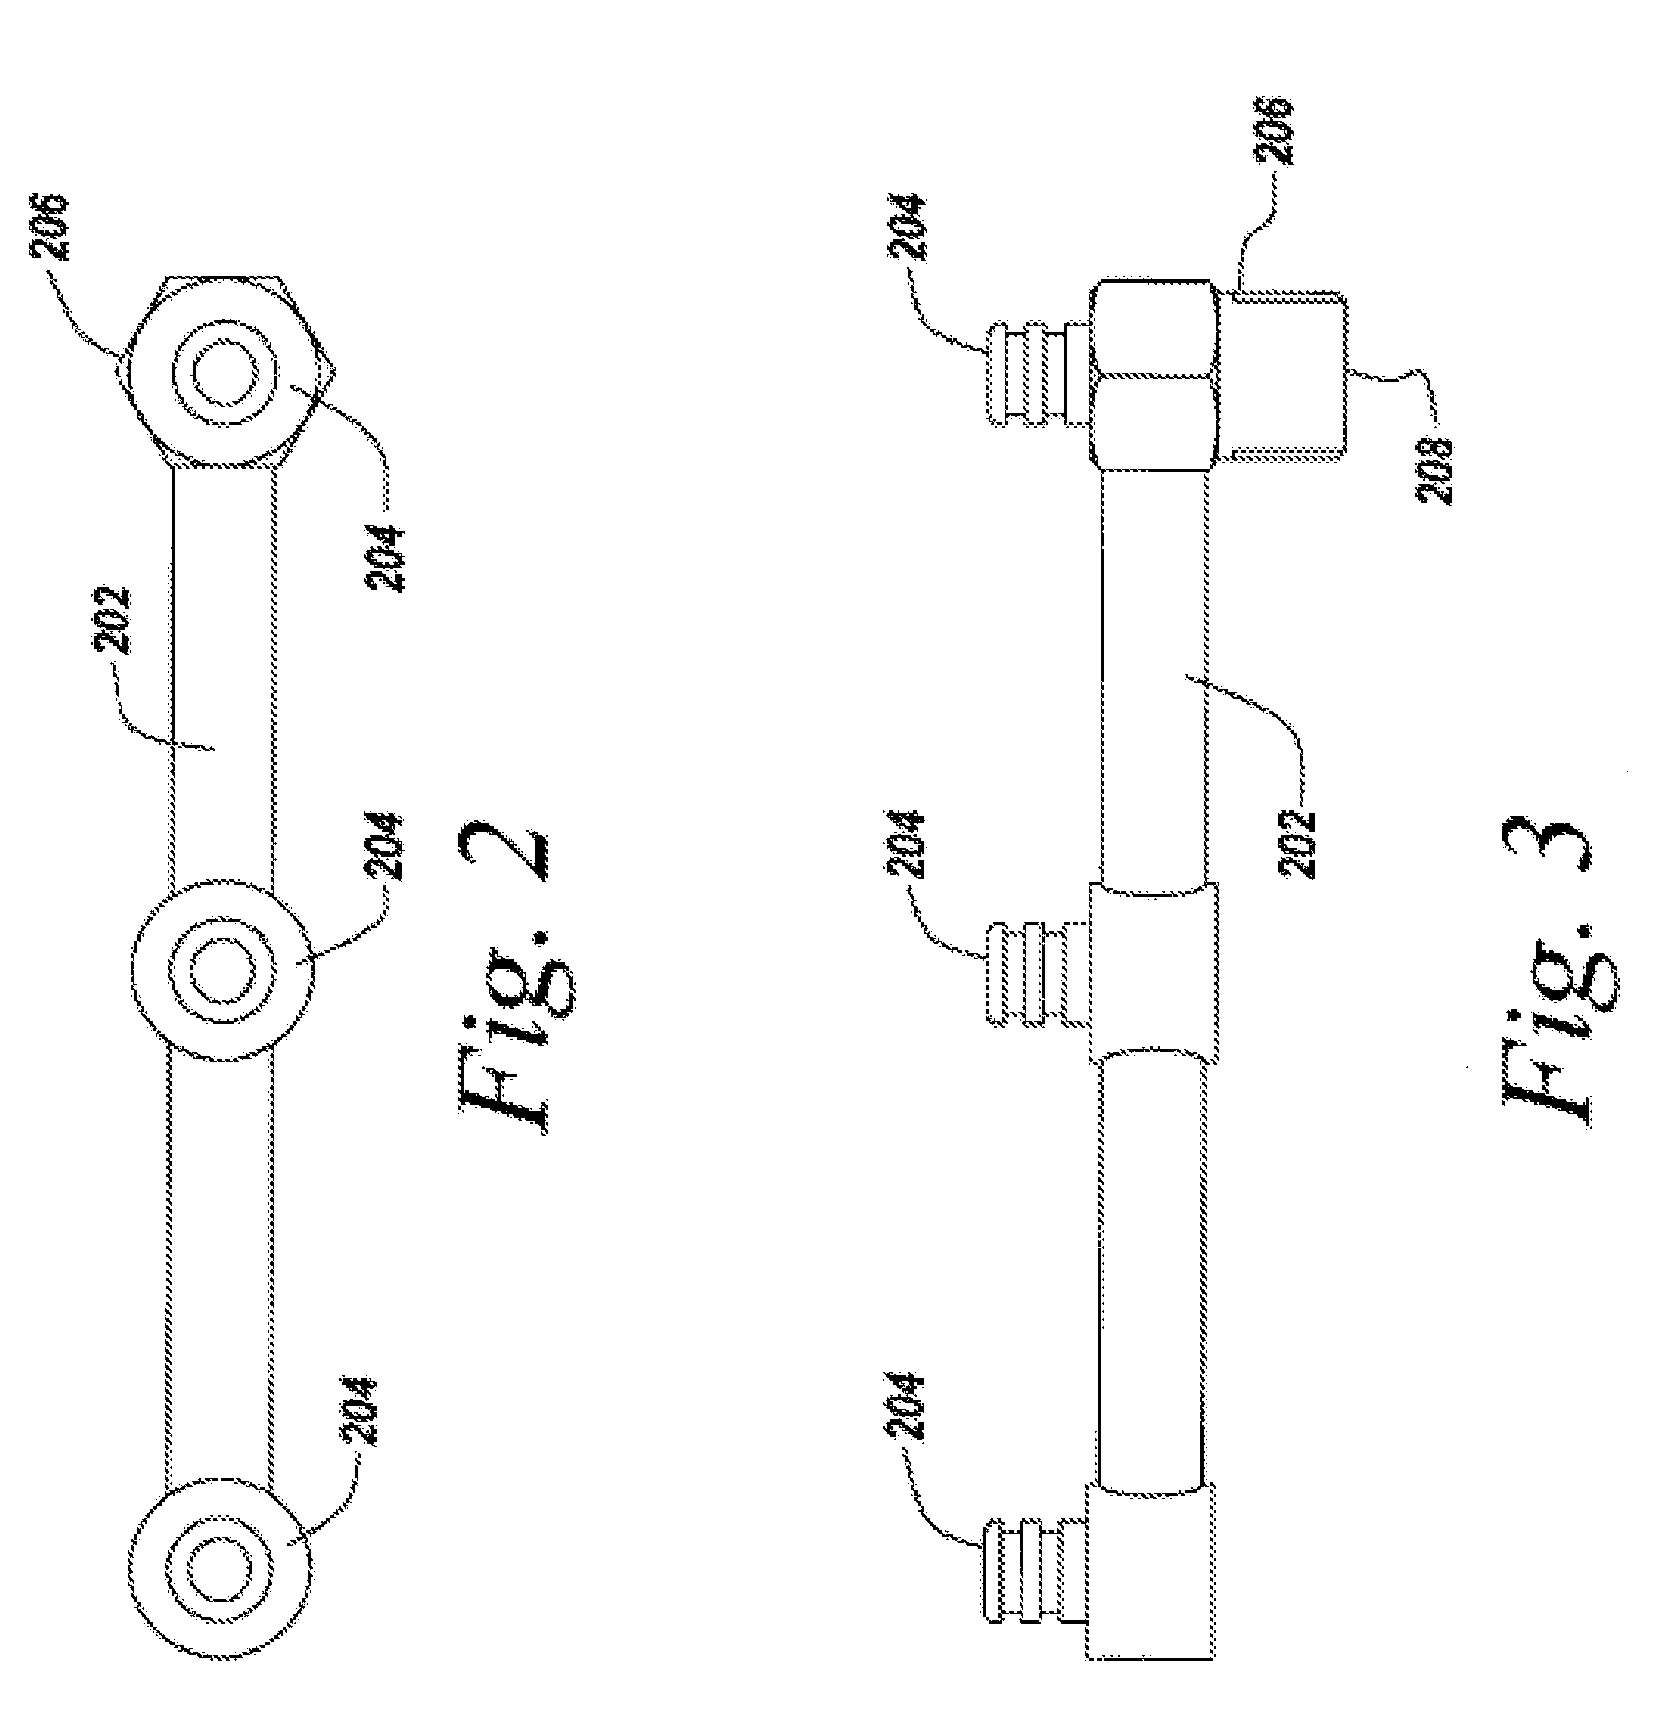 Heating element assembly for electric tankless liquid heater